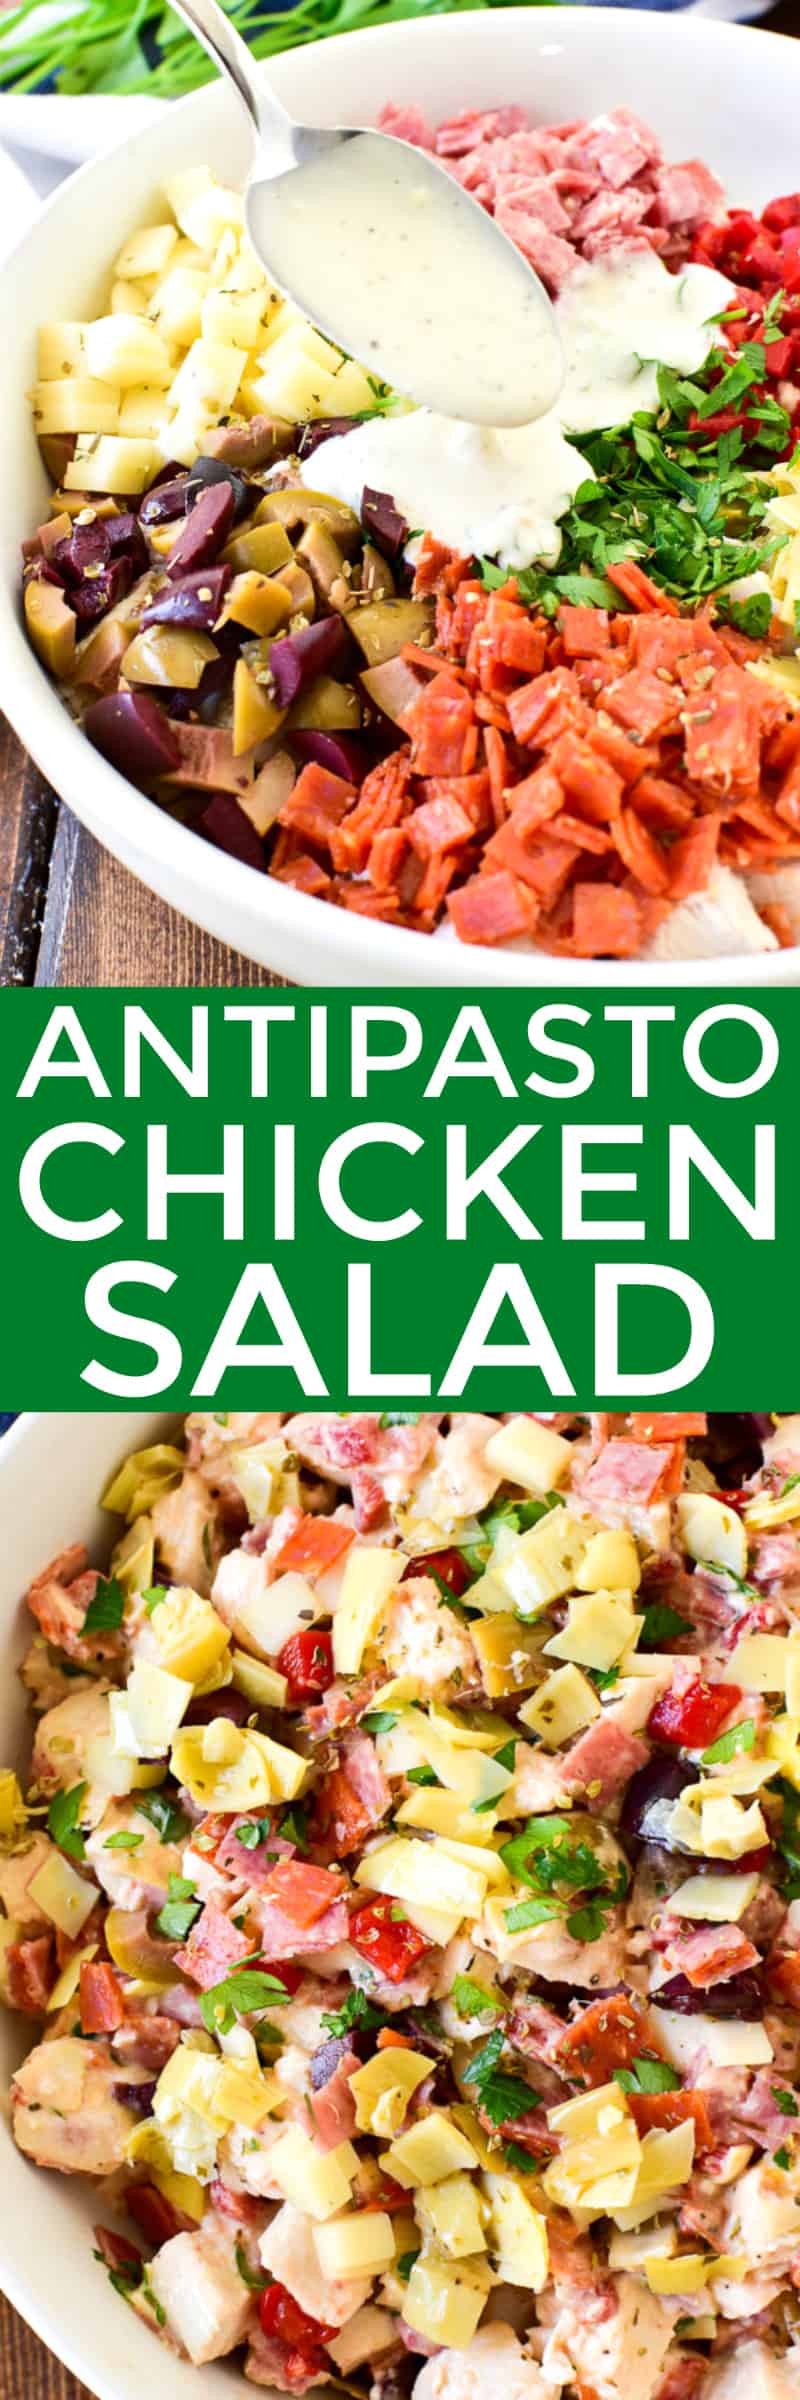 Antipasto Chicken Salad is a delicious twist on a classic! It combines all the traditional antipasto flavors in a simple creamy Italian dressing. Perfect for summer picnics or weeknight dinners, this chicken salad is amazing in a sandwich or all on its own. If you love antipasto, you'll love this yummy combo! @sugardale #sponsored